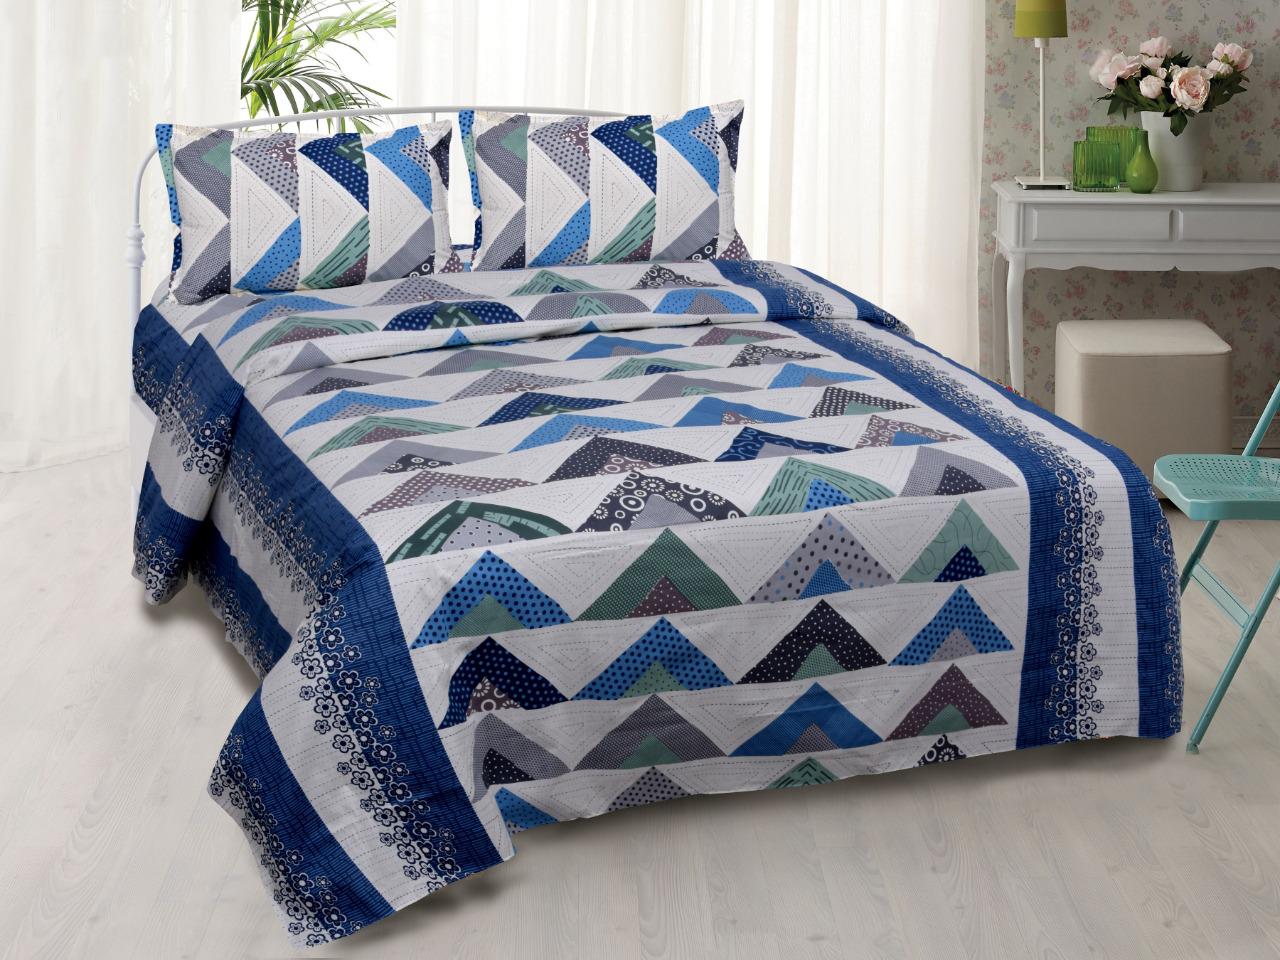 Beautiful Off white Base Blue Triangle Print King Size Cotton Bed Sheet